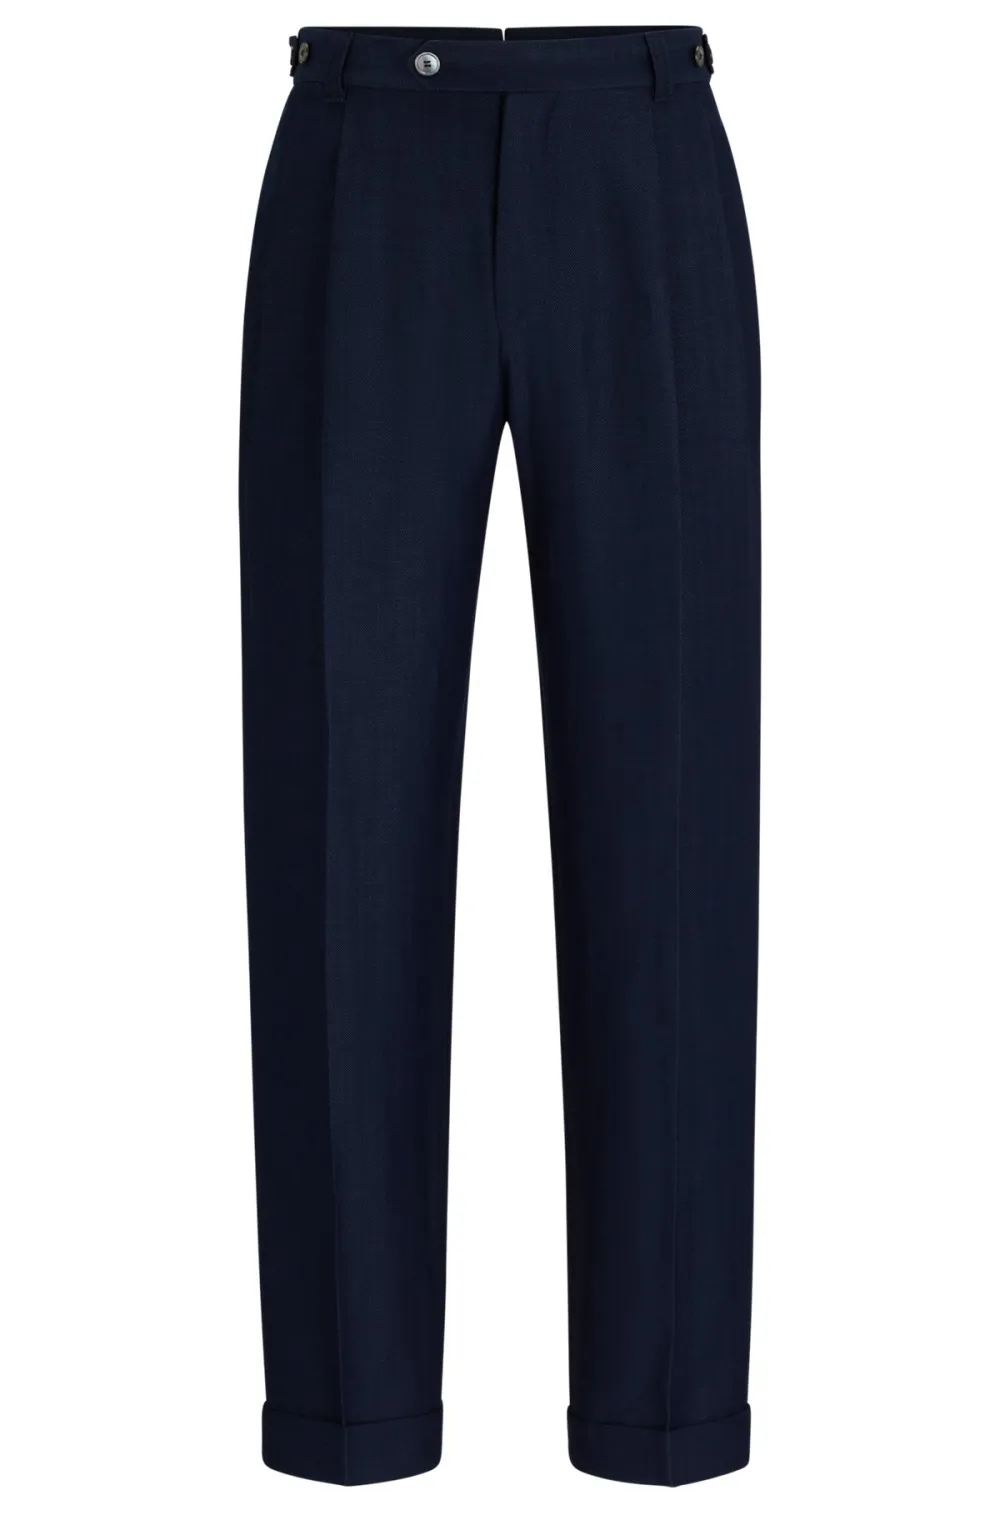 Relaxed-fit trousers in herringbone virgin wool and linen